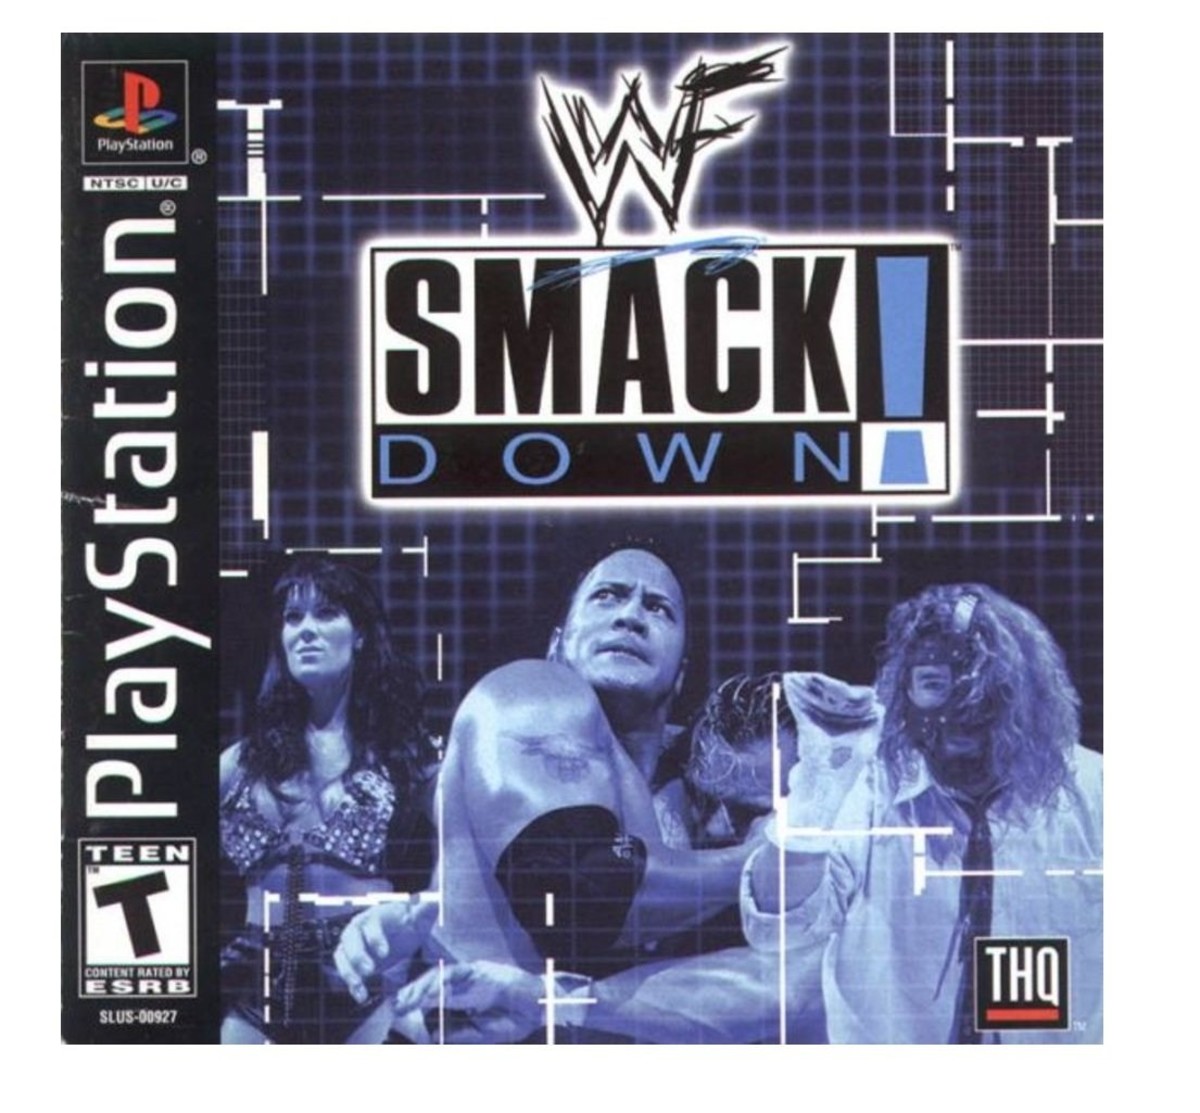 WWF Smackdown cover